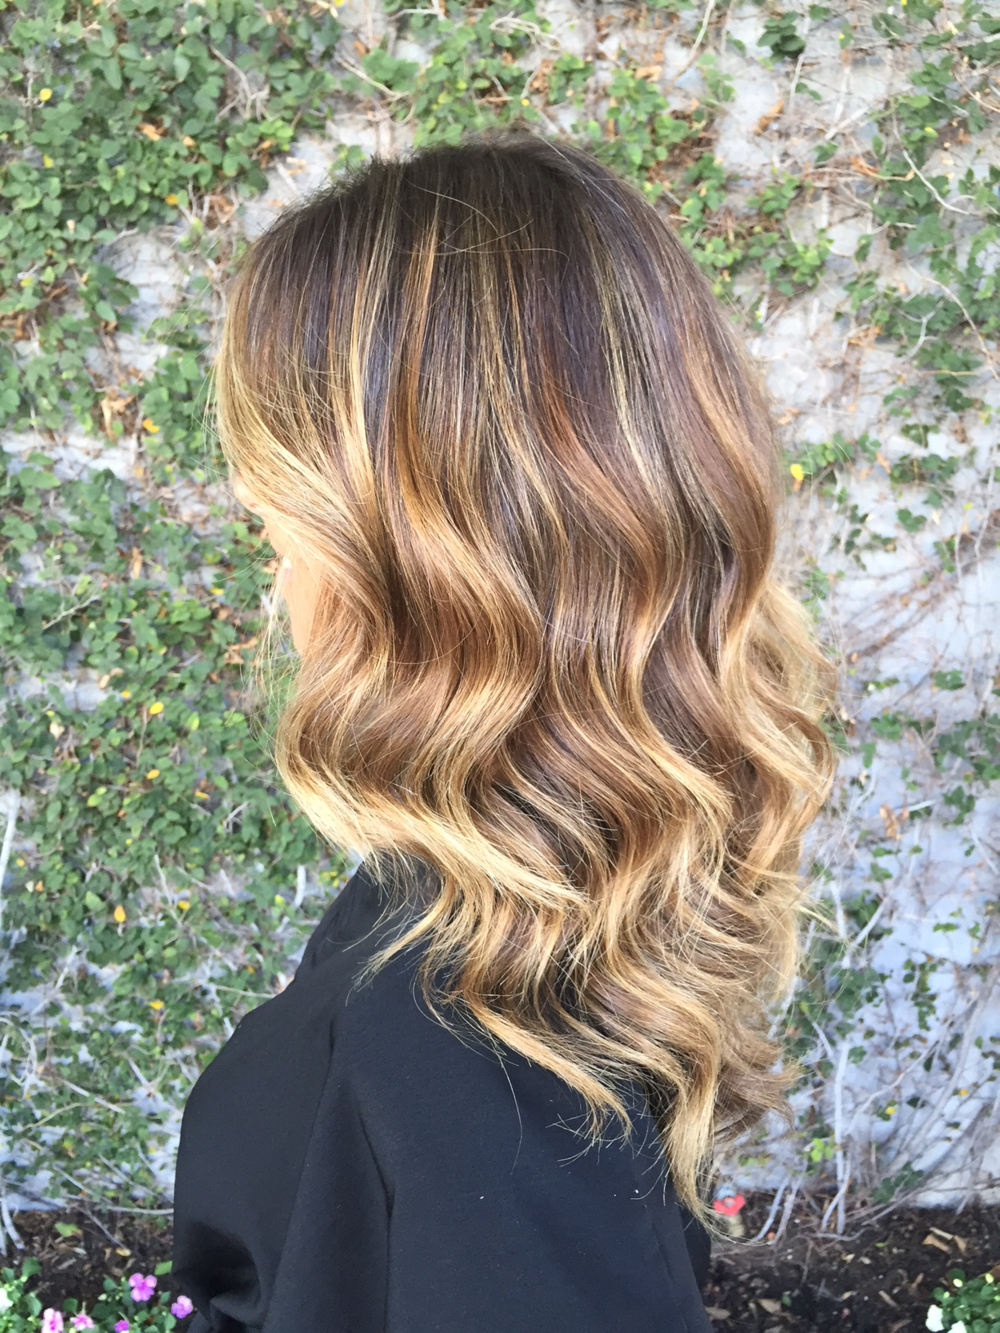 Newest Hair Trend for Gorgeous Sun-kissed Highlights — The Glow Girl by  Melissa Meyers